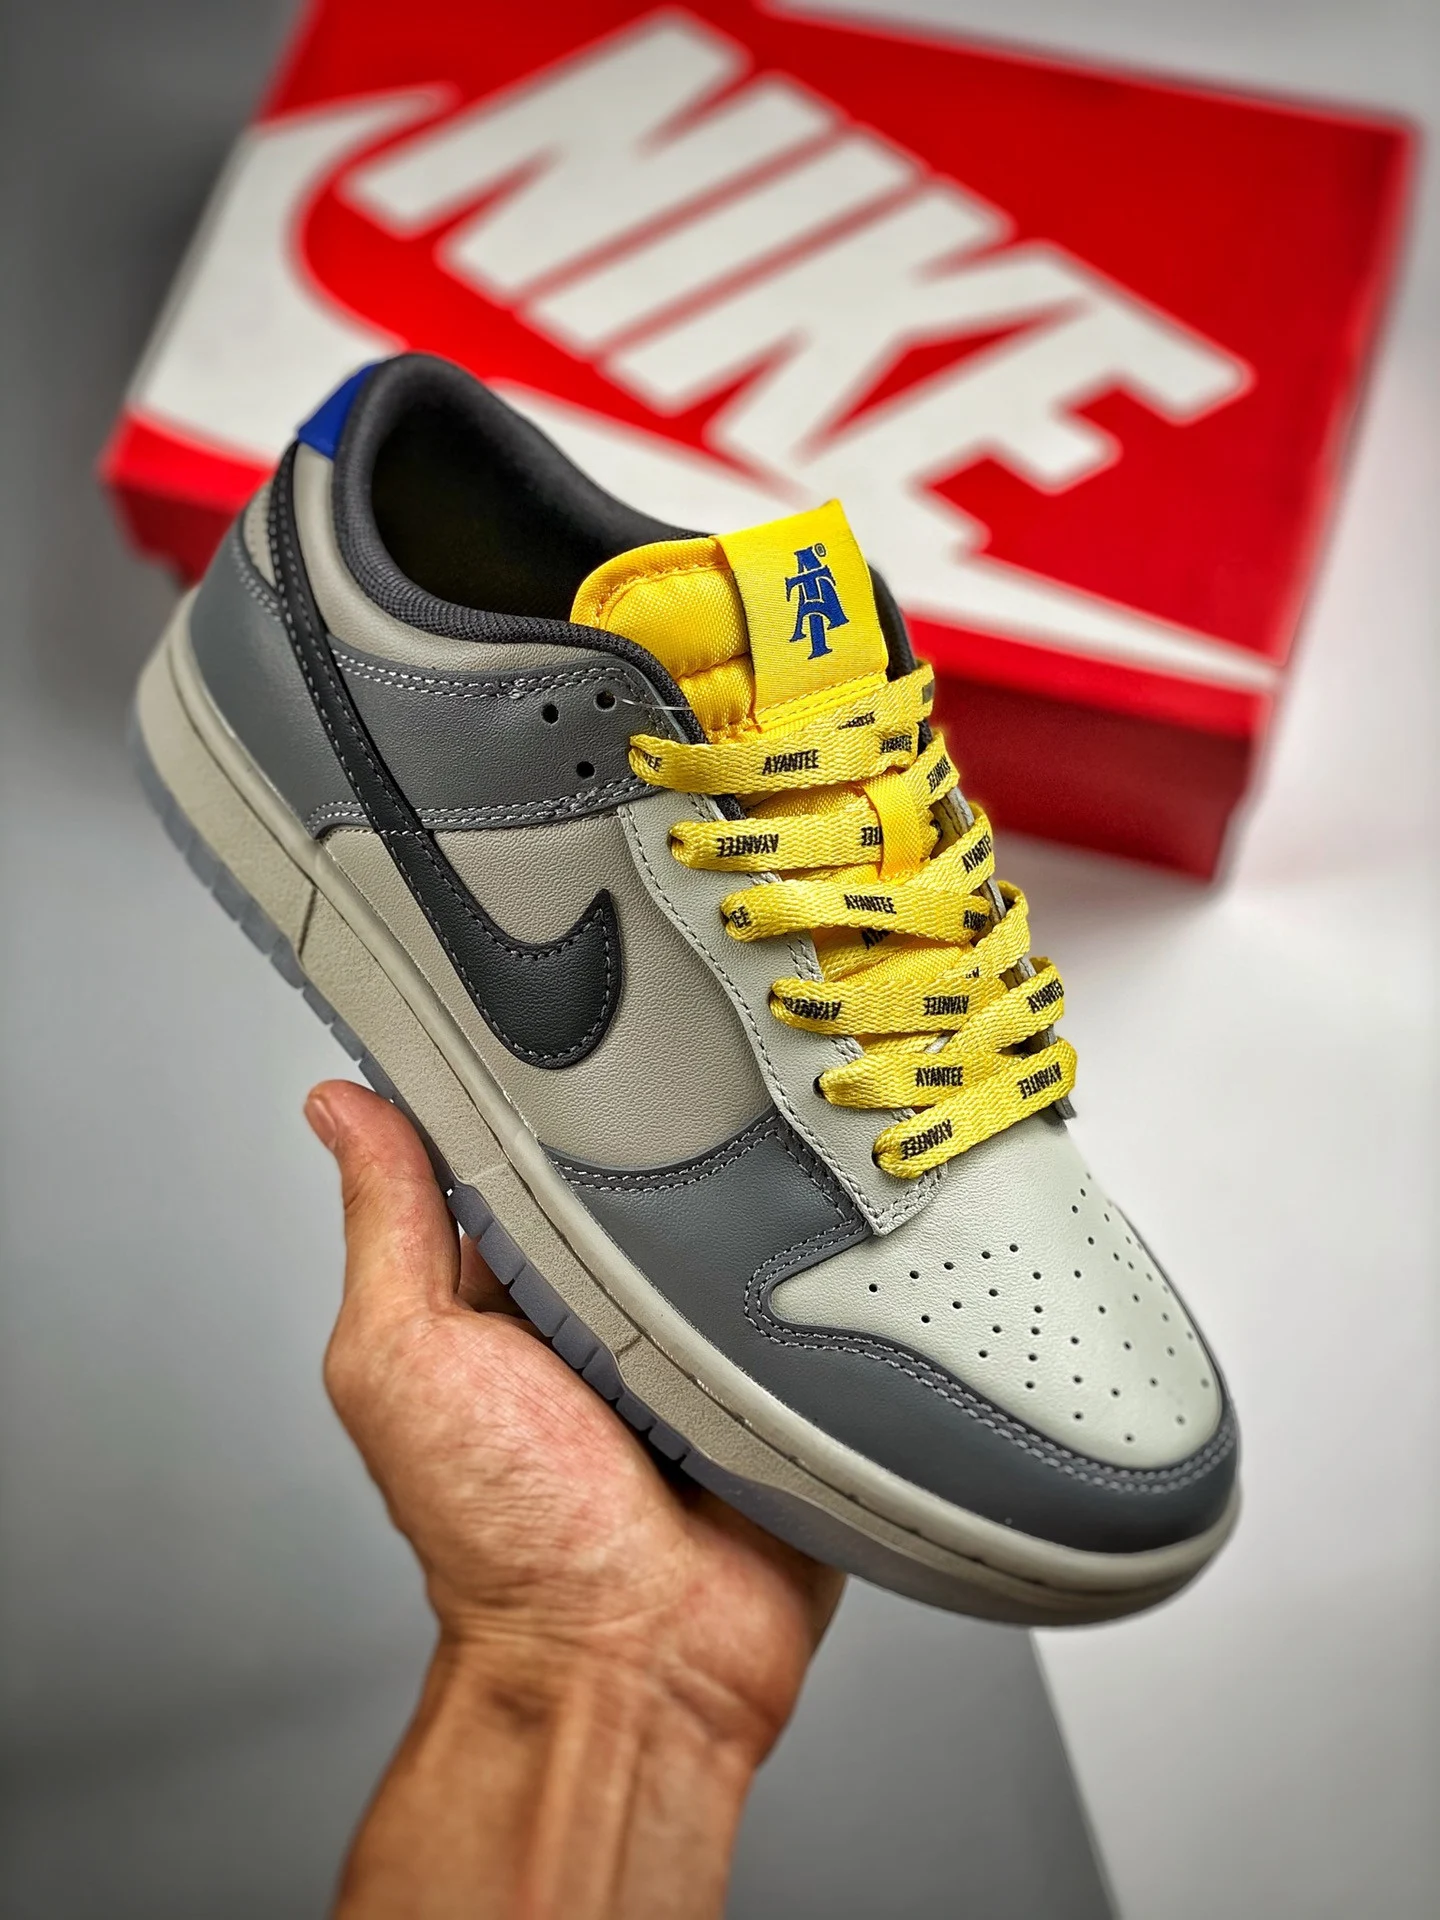 North Carolina A&T x Nike Dunk Low Cool Grey Yellow-Blue-Black-Sail For Sale